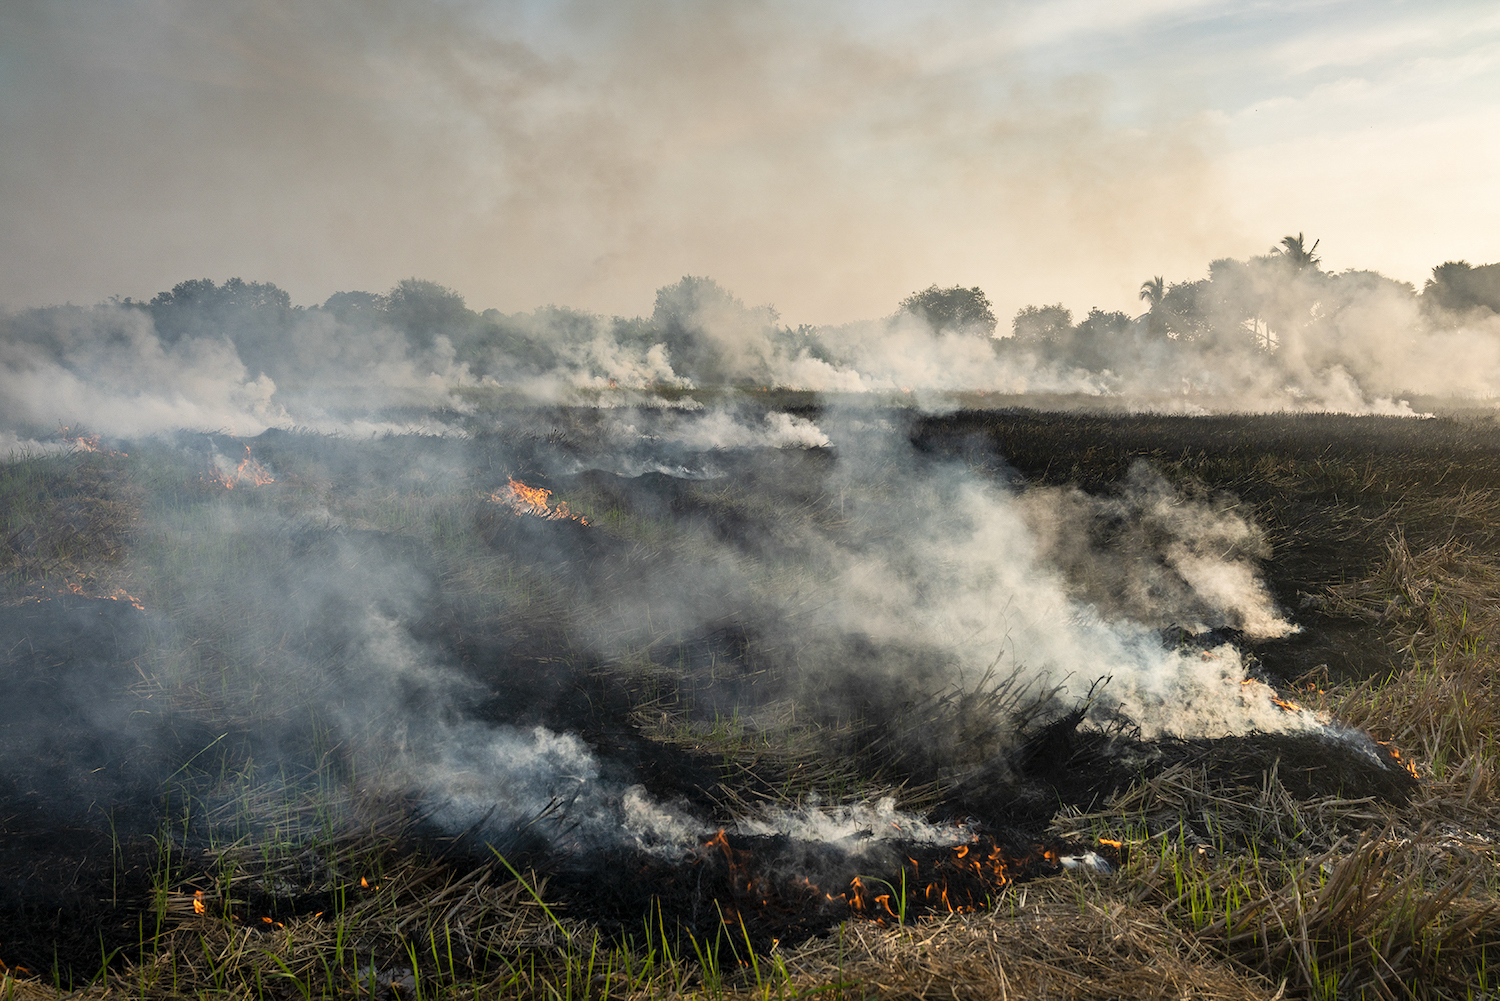 Farmers burn rice straw to clear a field beside the road between Dala and Twante in Yangon Region on December 14. Biomass burning, including crop residues, contribute significantly to Yangon's air pollution. (Hkun Lat | Frontier)